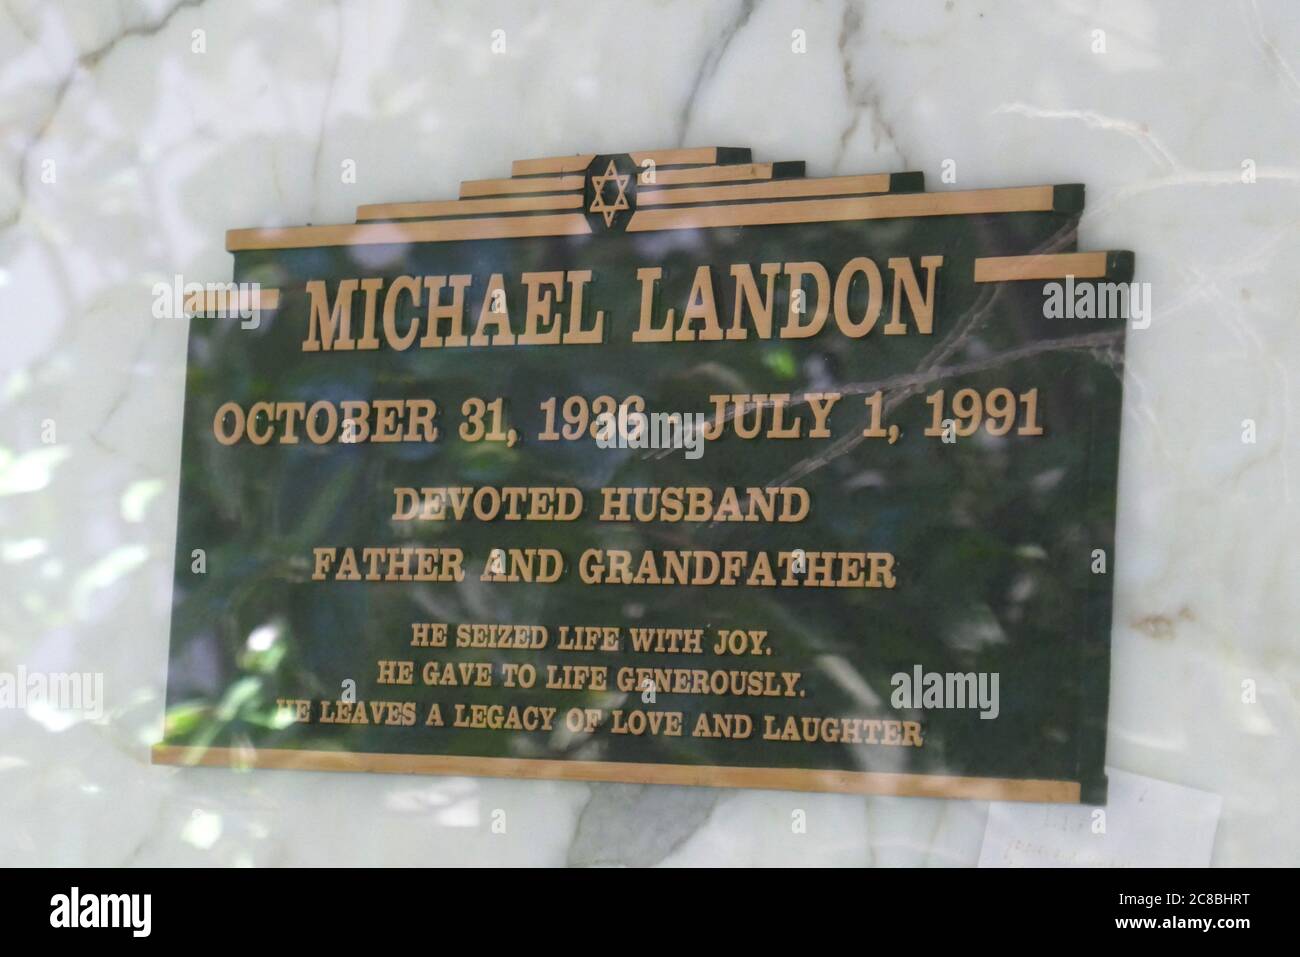 Culver City, California, USA 22nd July 2020 A general view of atmosphere of Michael Landon's Grave at Hillside Memorial Park in Culver City, California, USA. Photo by Barry King/Alamy Stock Photo Stock Photo